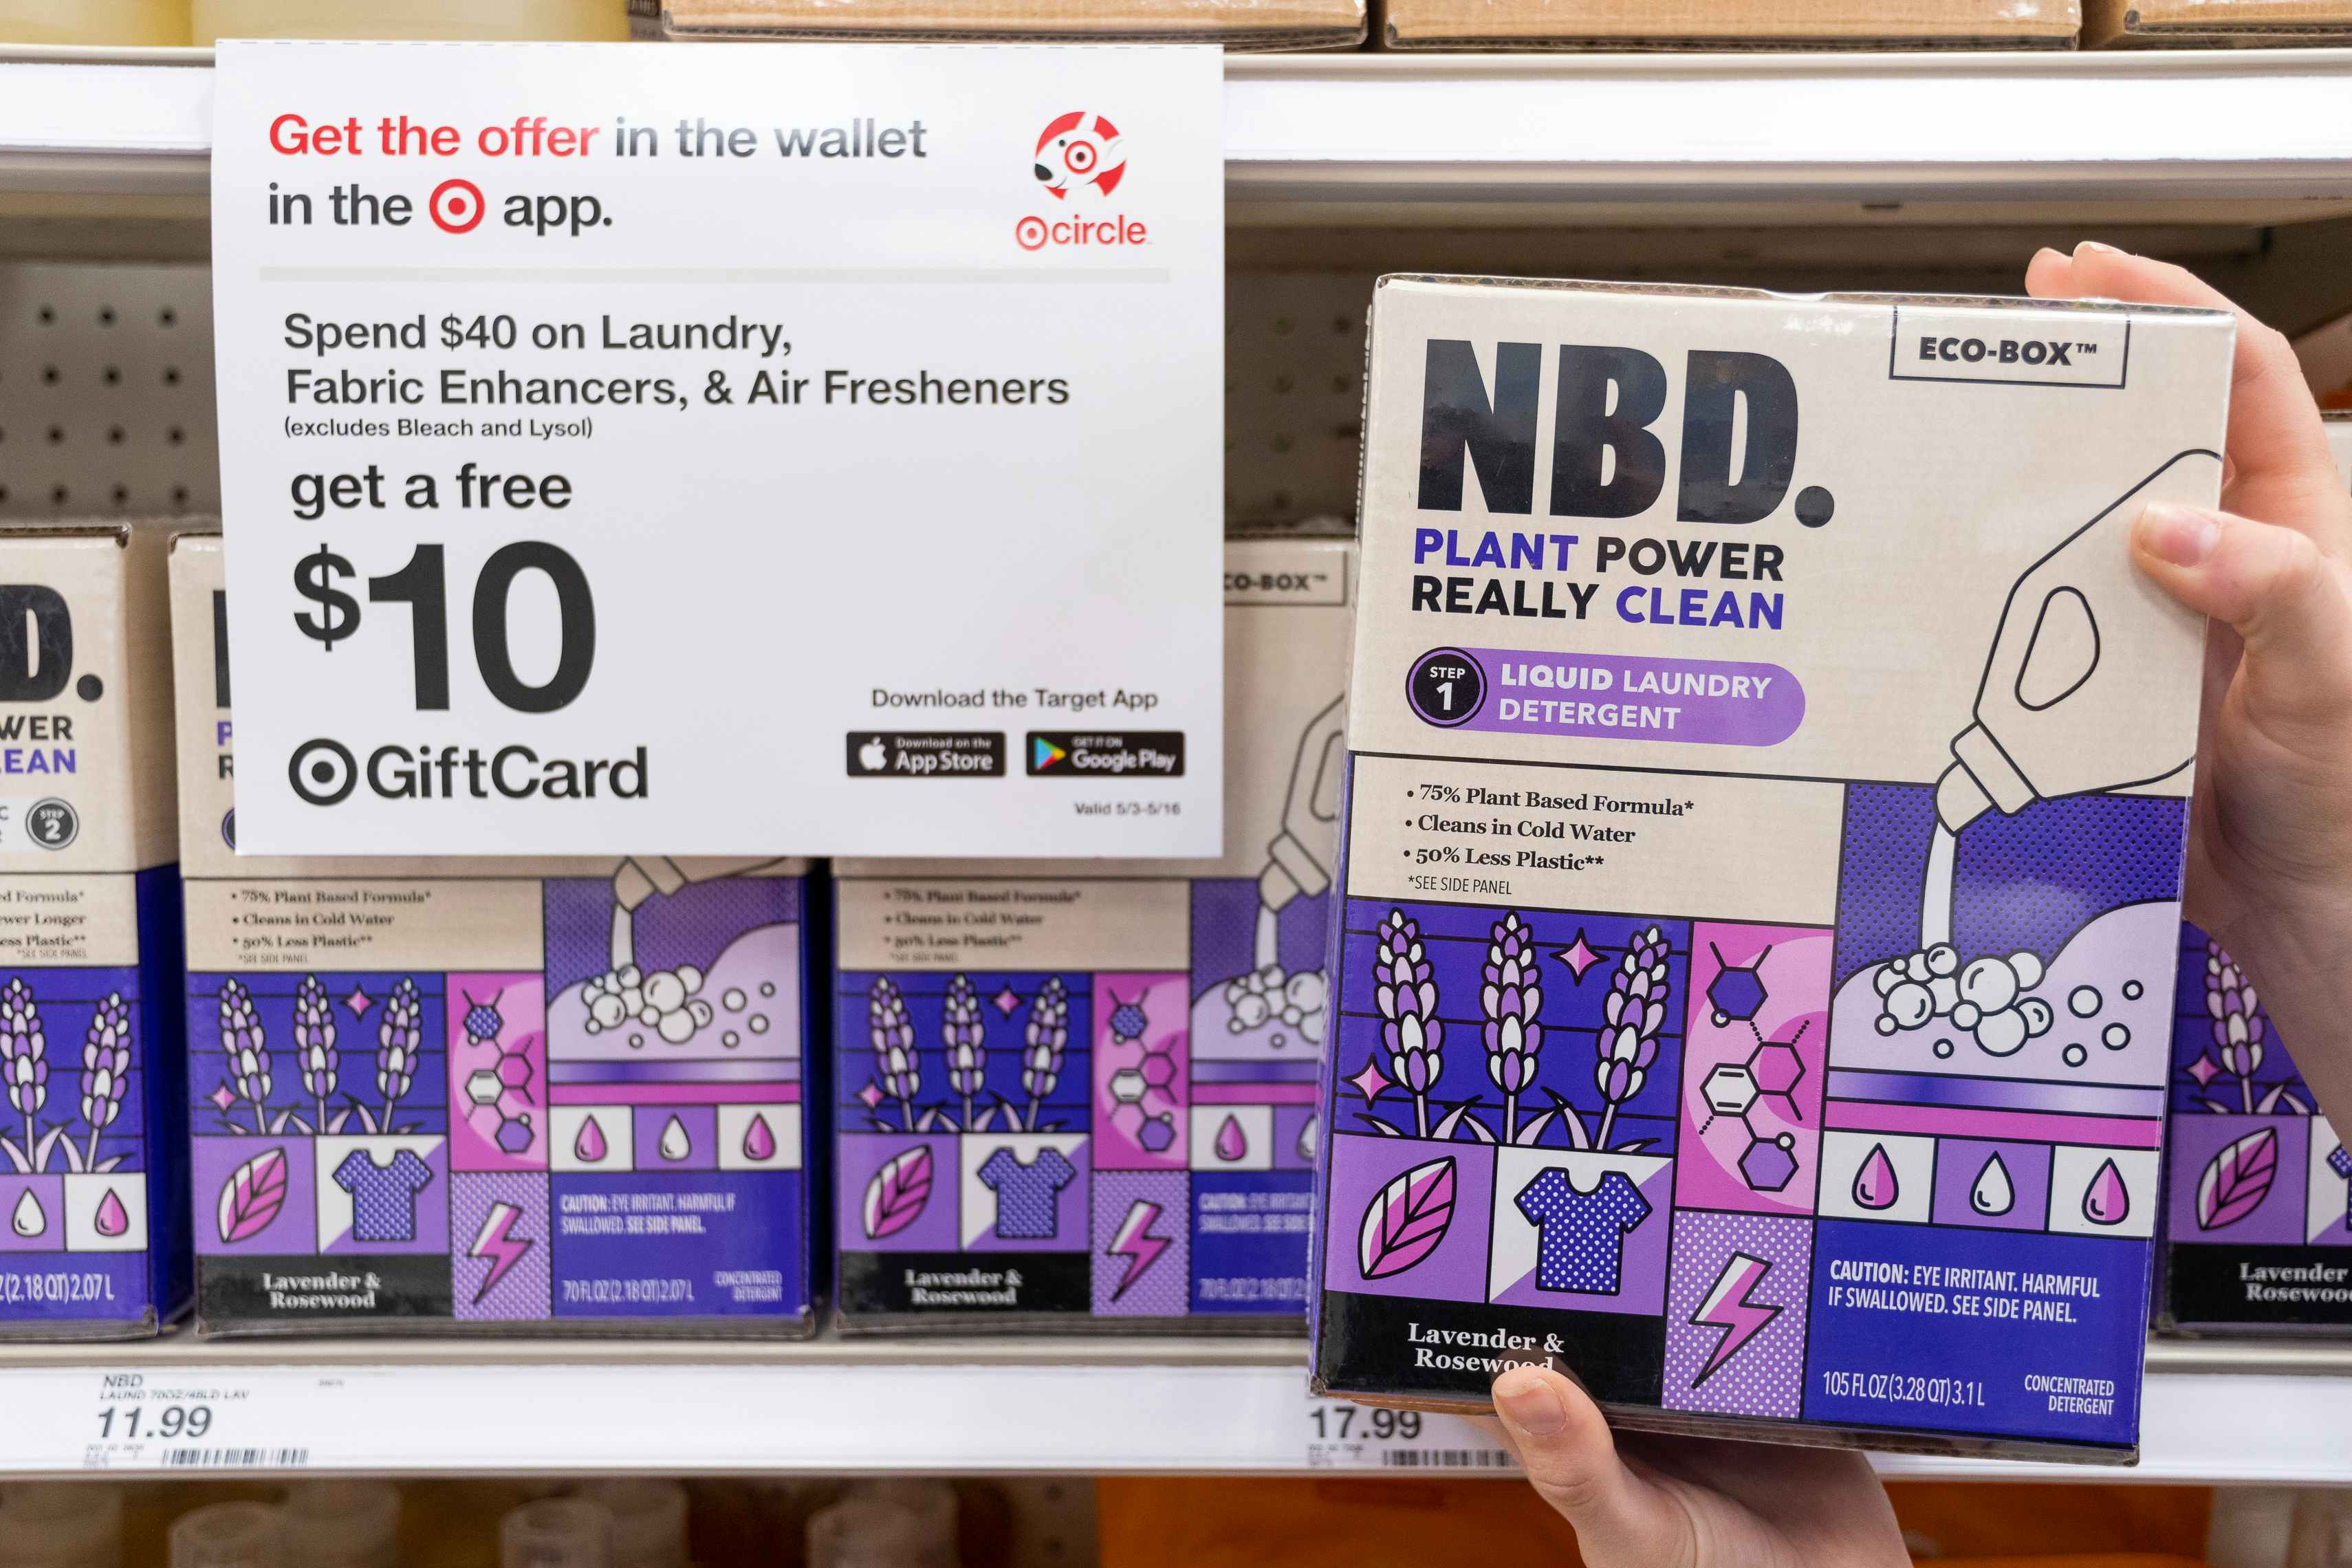 A person holding up a box of NBD laundry detergent next to a sign for a free $10 gift card with a $40 laundry purchase